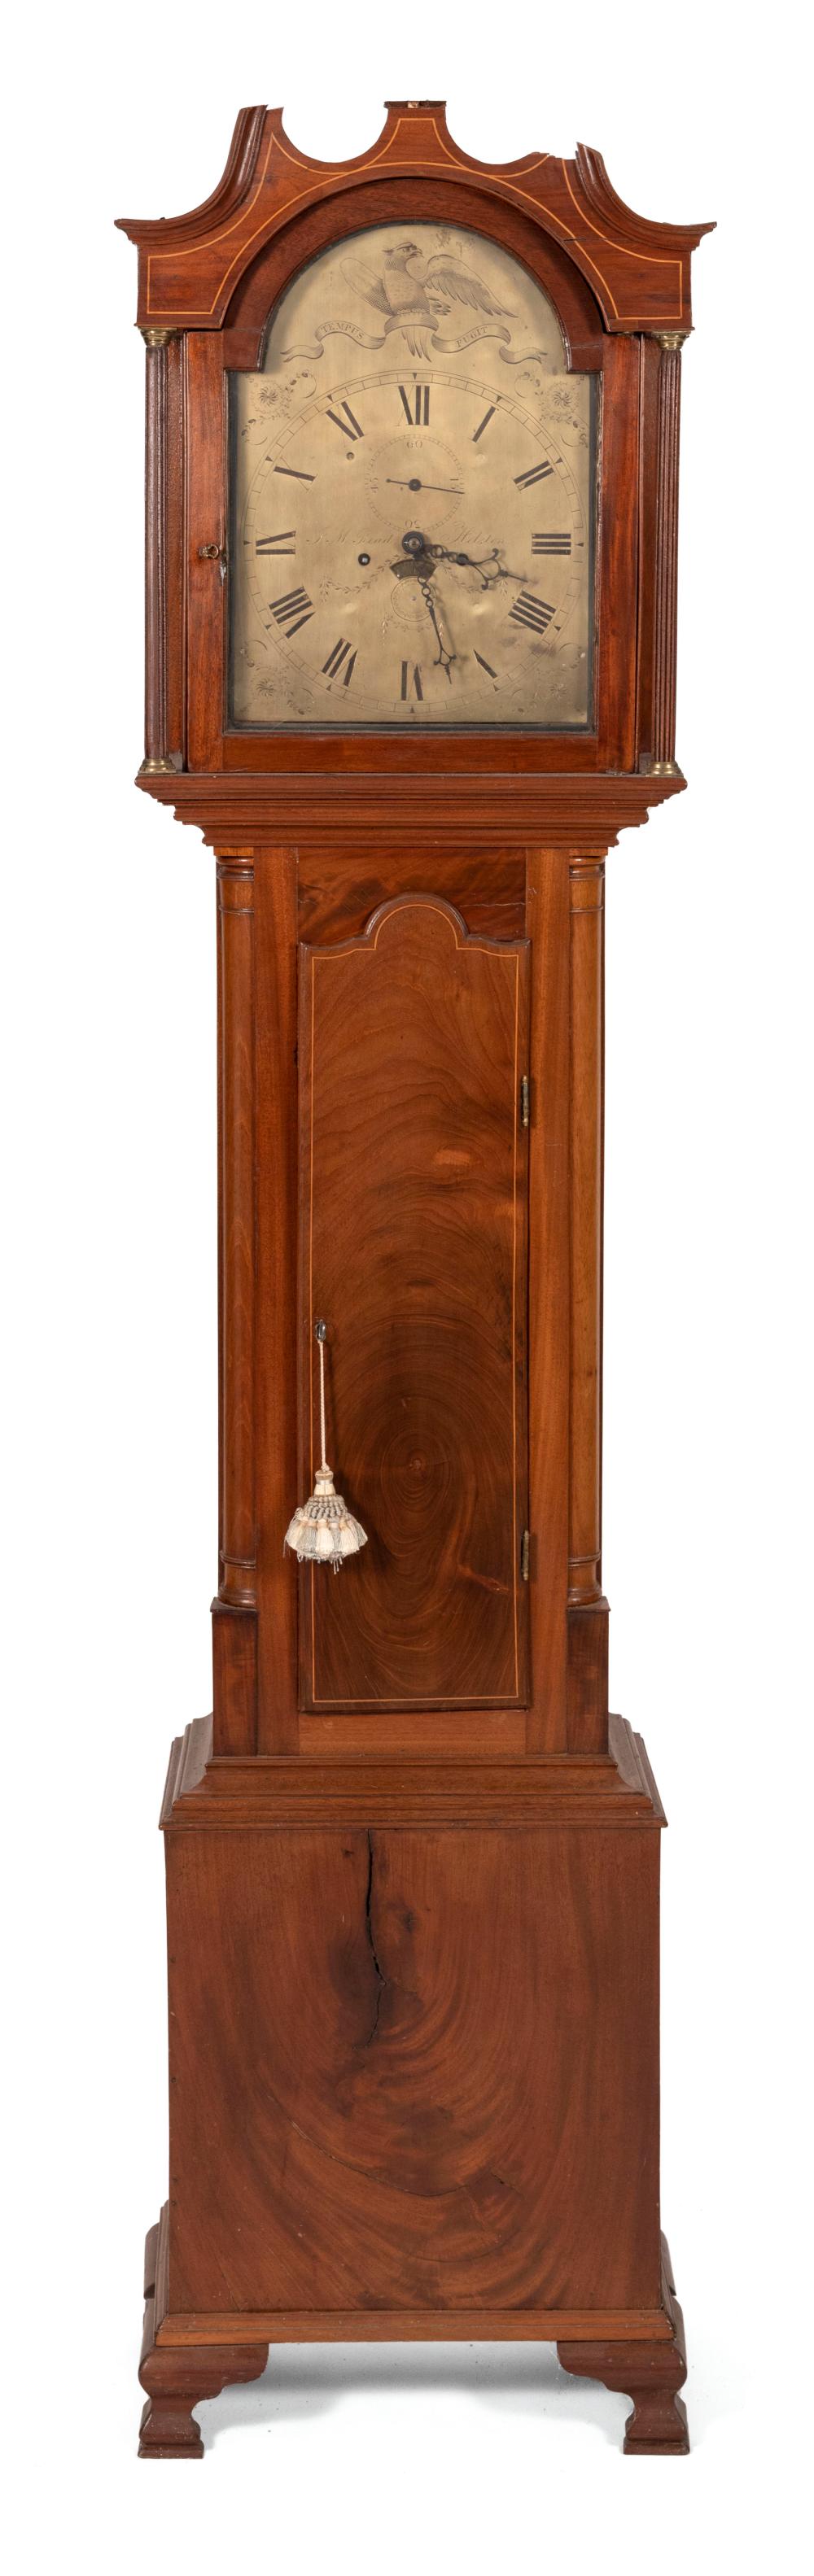 ENGLISH TALL CASE CLOCK EARLY 19TH 34d061